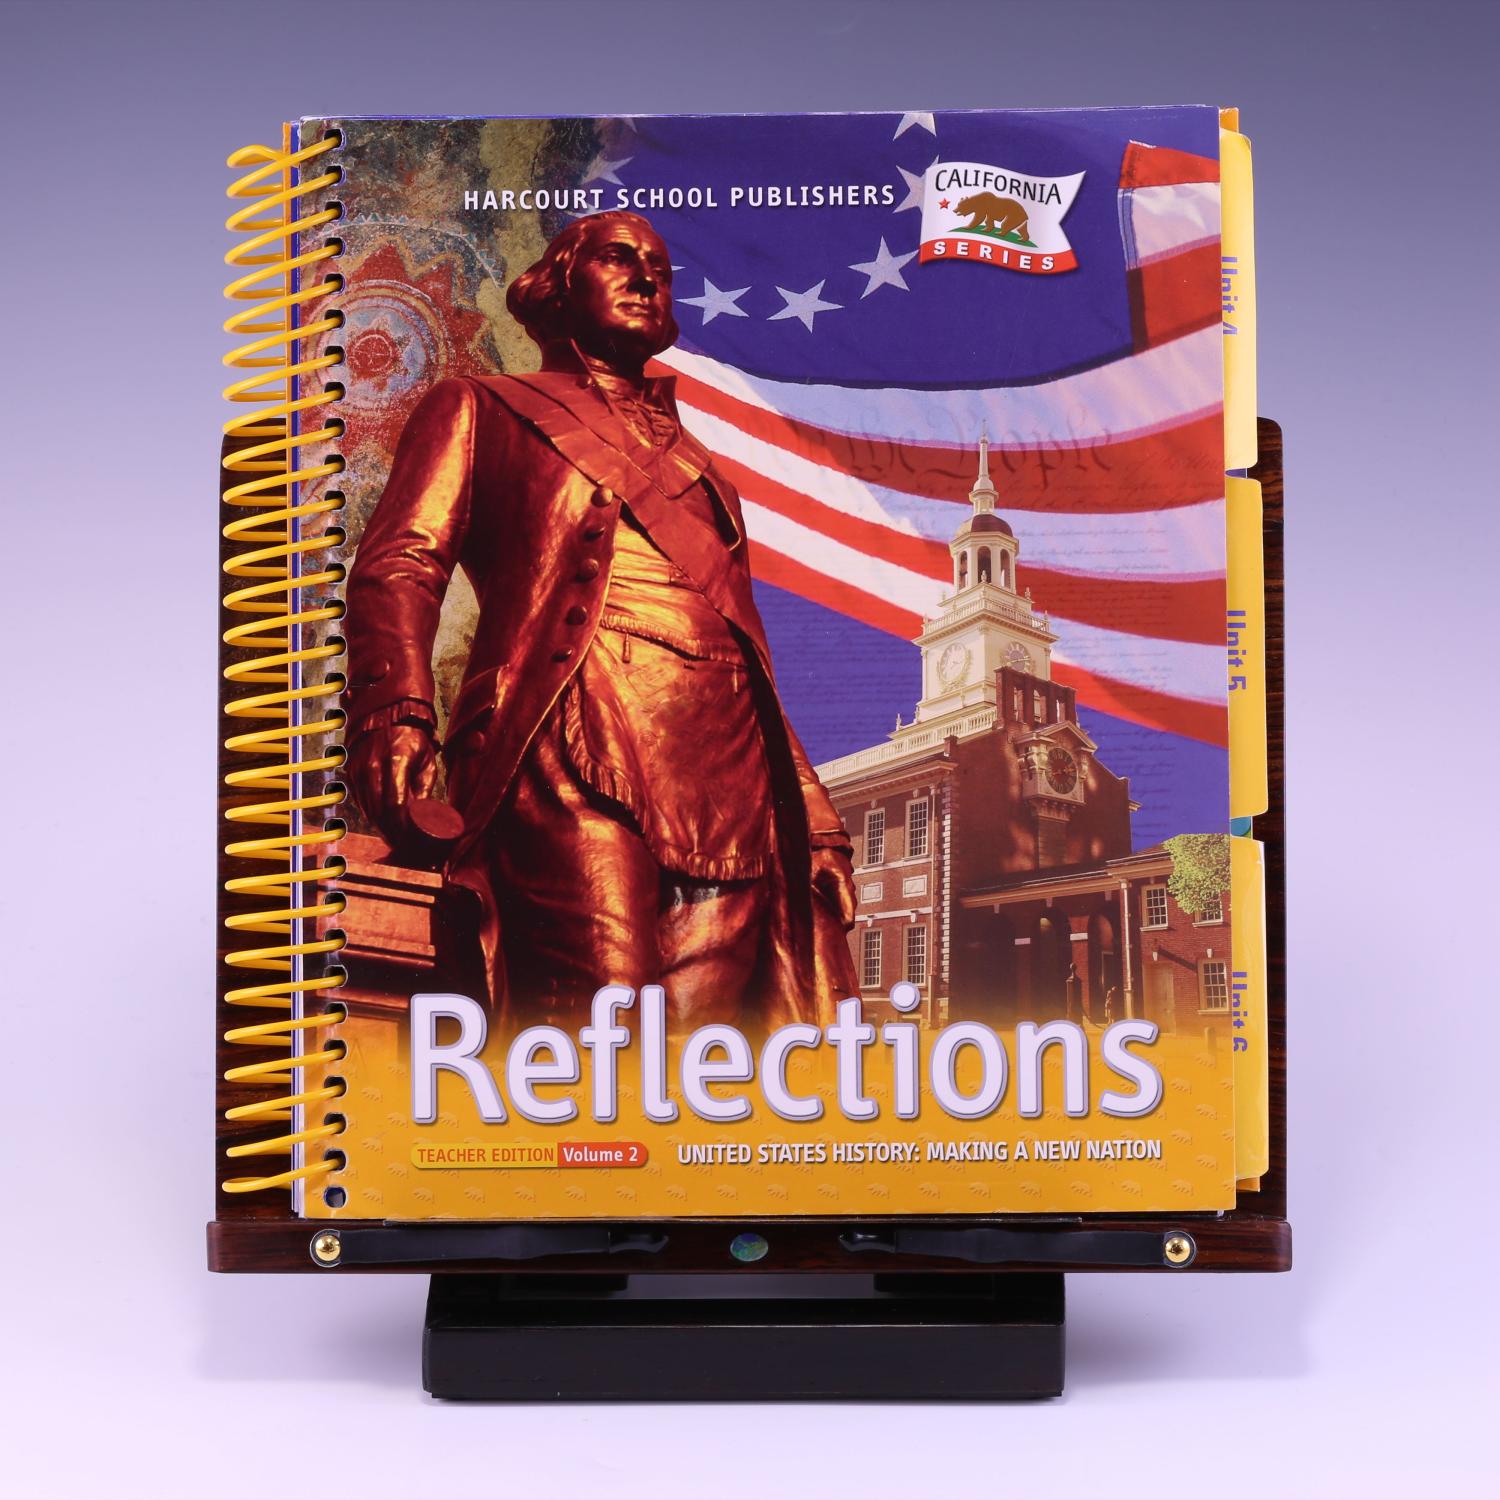 REFLECTIONS UNITED STATES HISTORY MAKING A NEW NATION GRADE 5 TEACHER EDITION Vol 2 CALIFORNIA